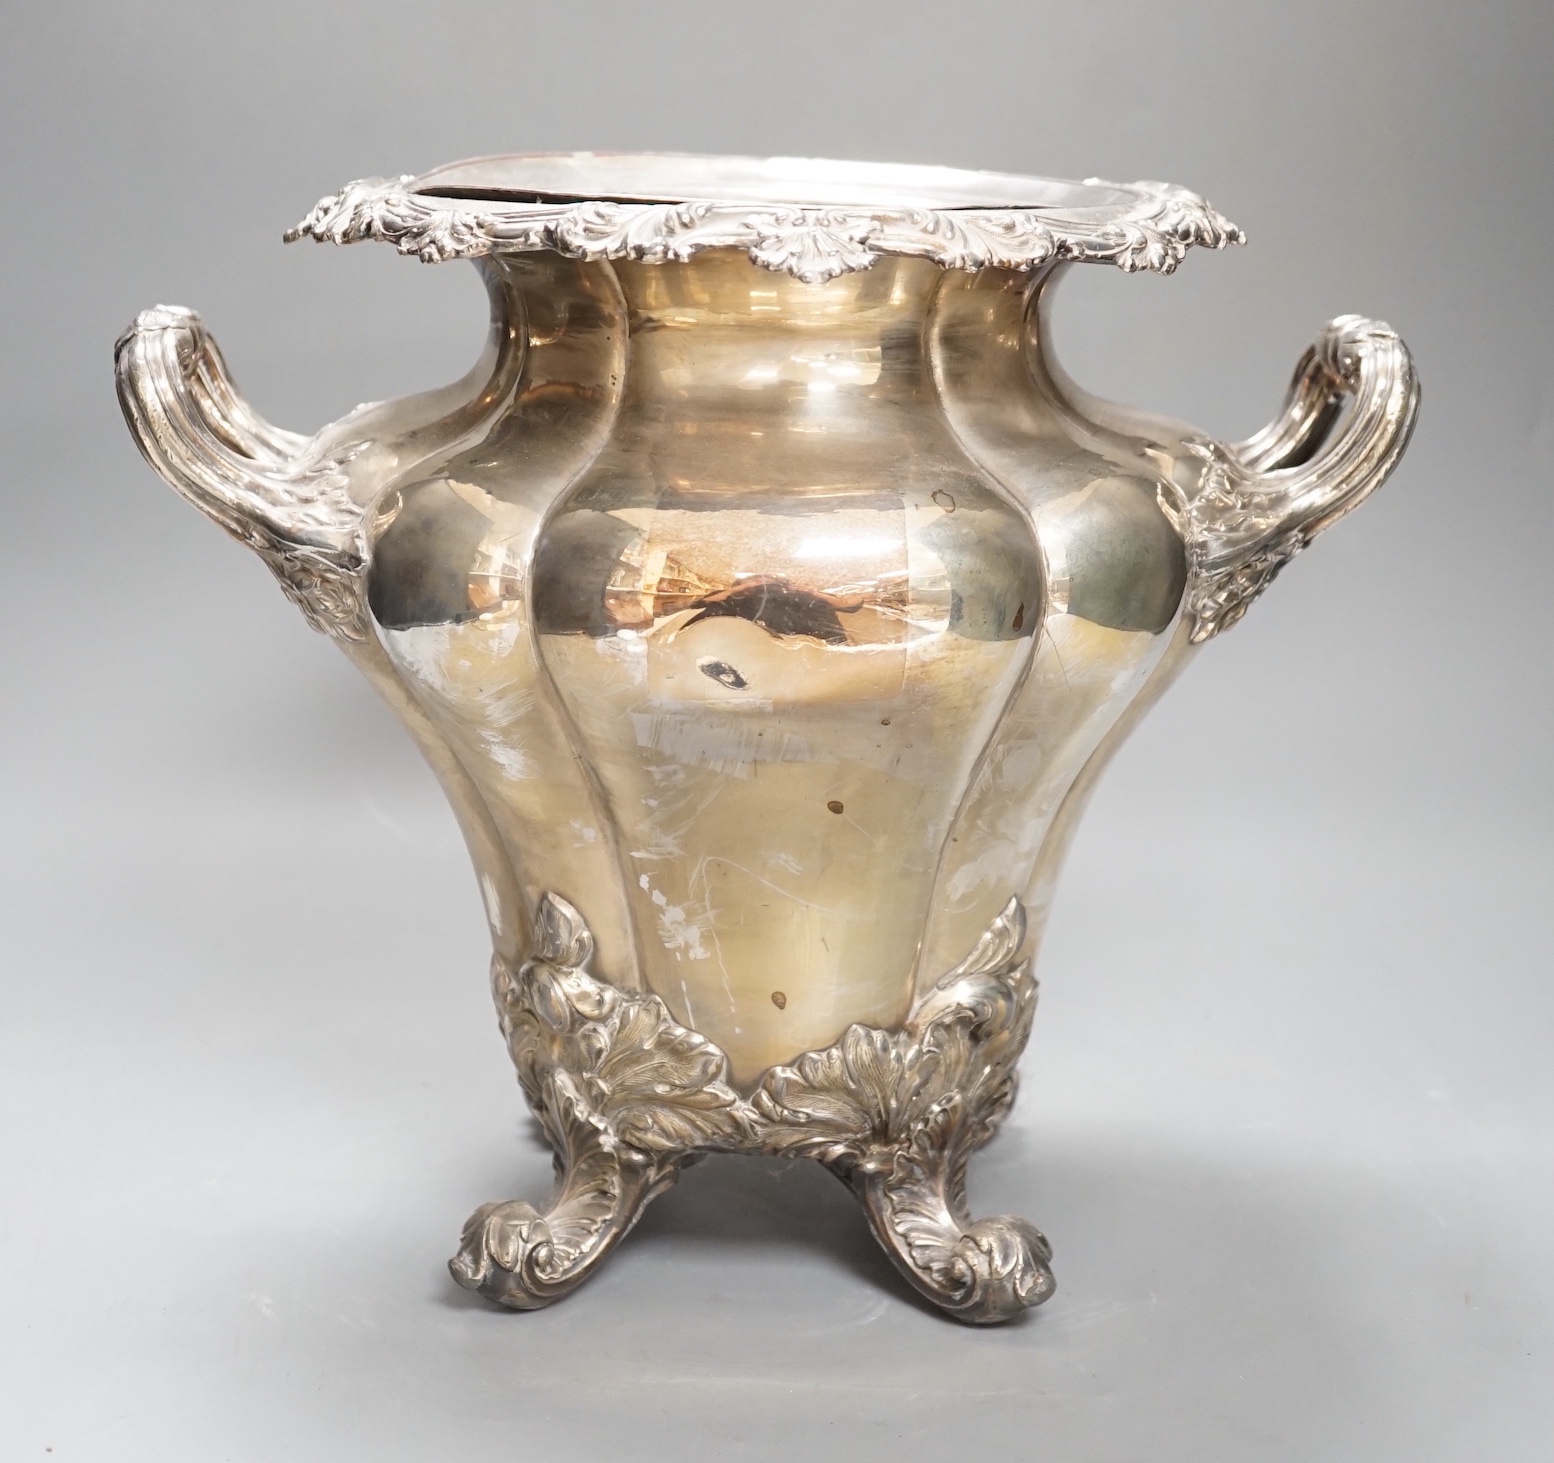 A William IV Old Sheffield plate twin handled wine cooler, with liner, acanthus scrolled borders, on four scrolled feet Height 28cm